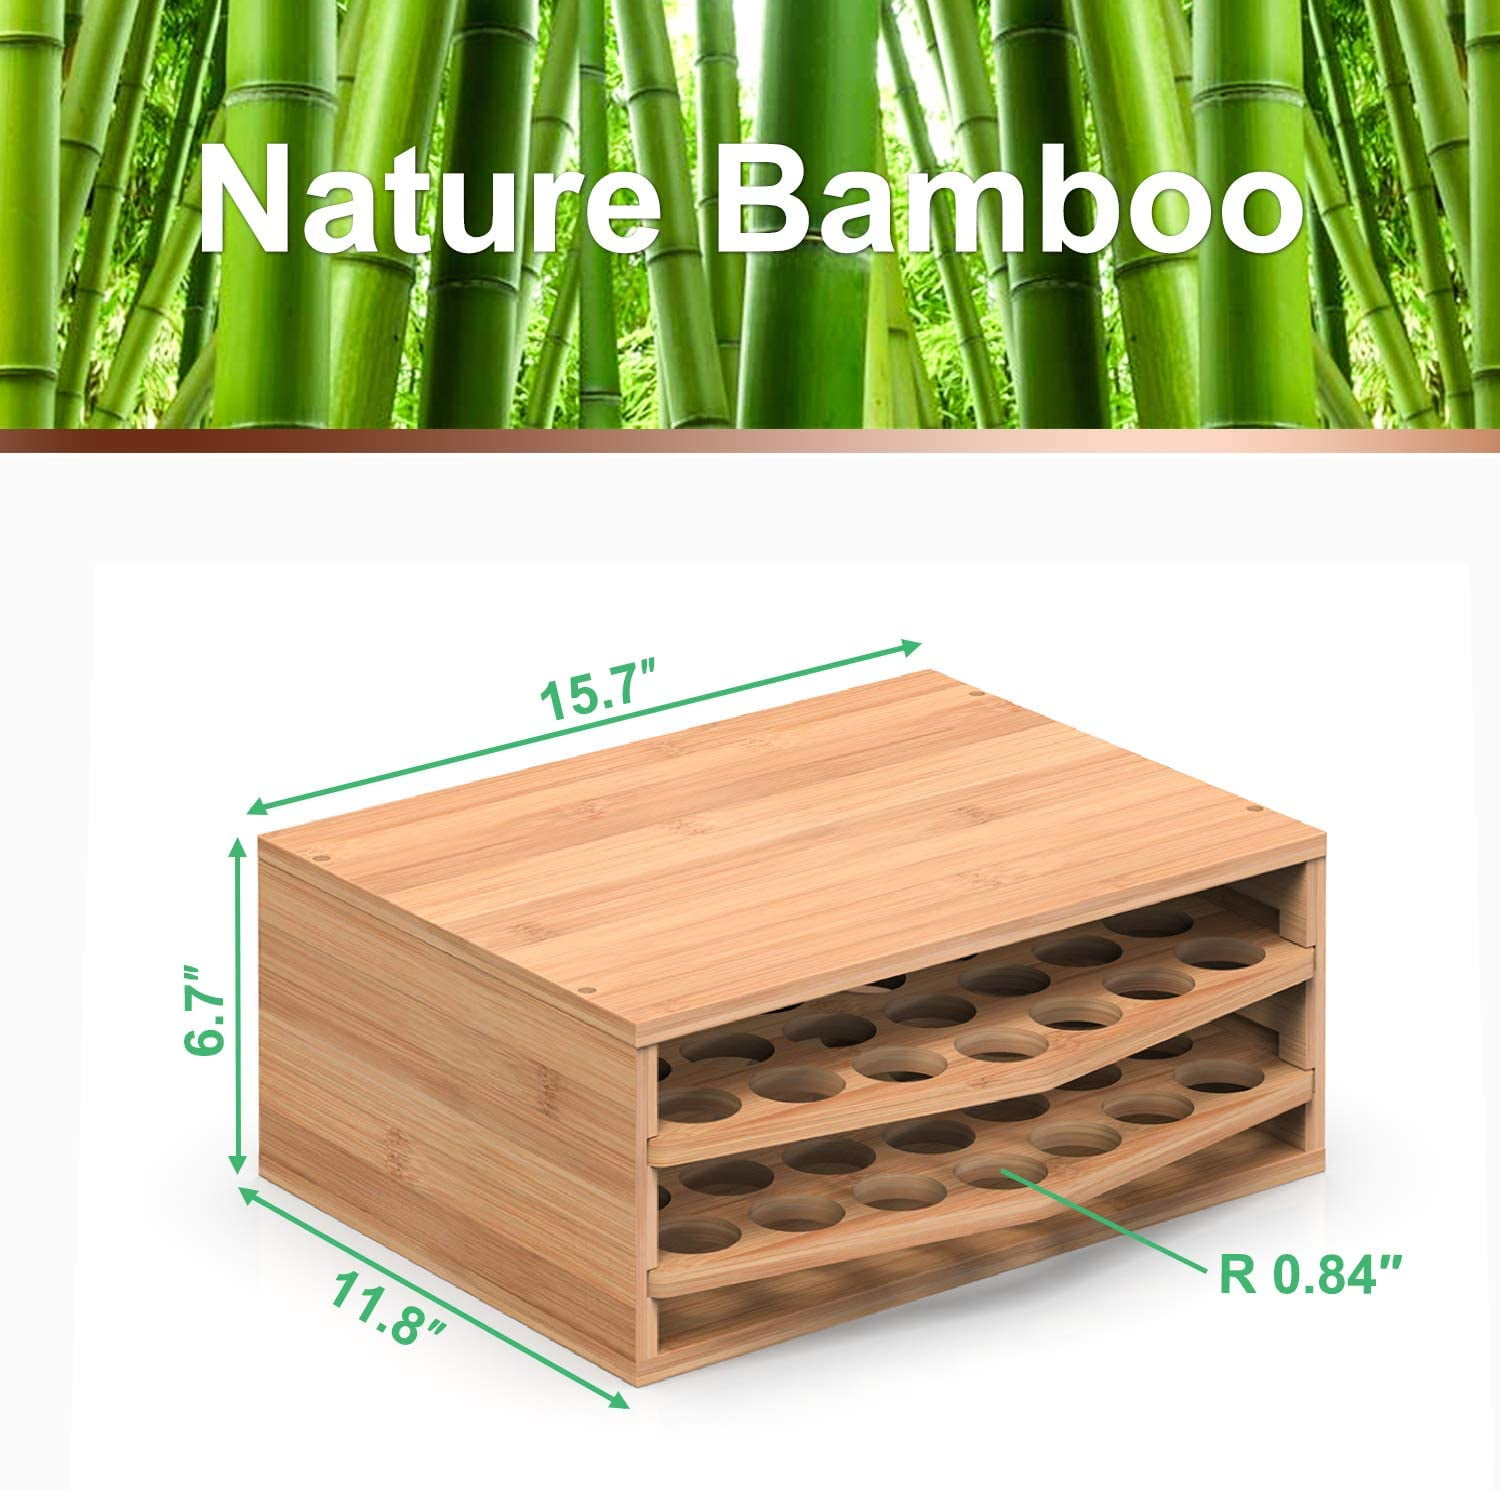 Restpresso Natural Bamboo Dual Airpot Coffee Dispenser Display - 23 1/2 inch x 7 inch x 13 1/2 inch - 1 Count Box